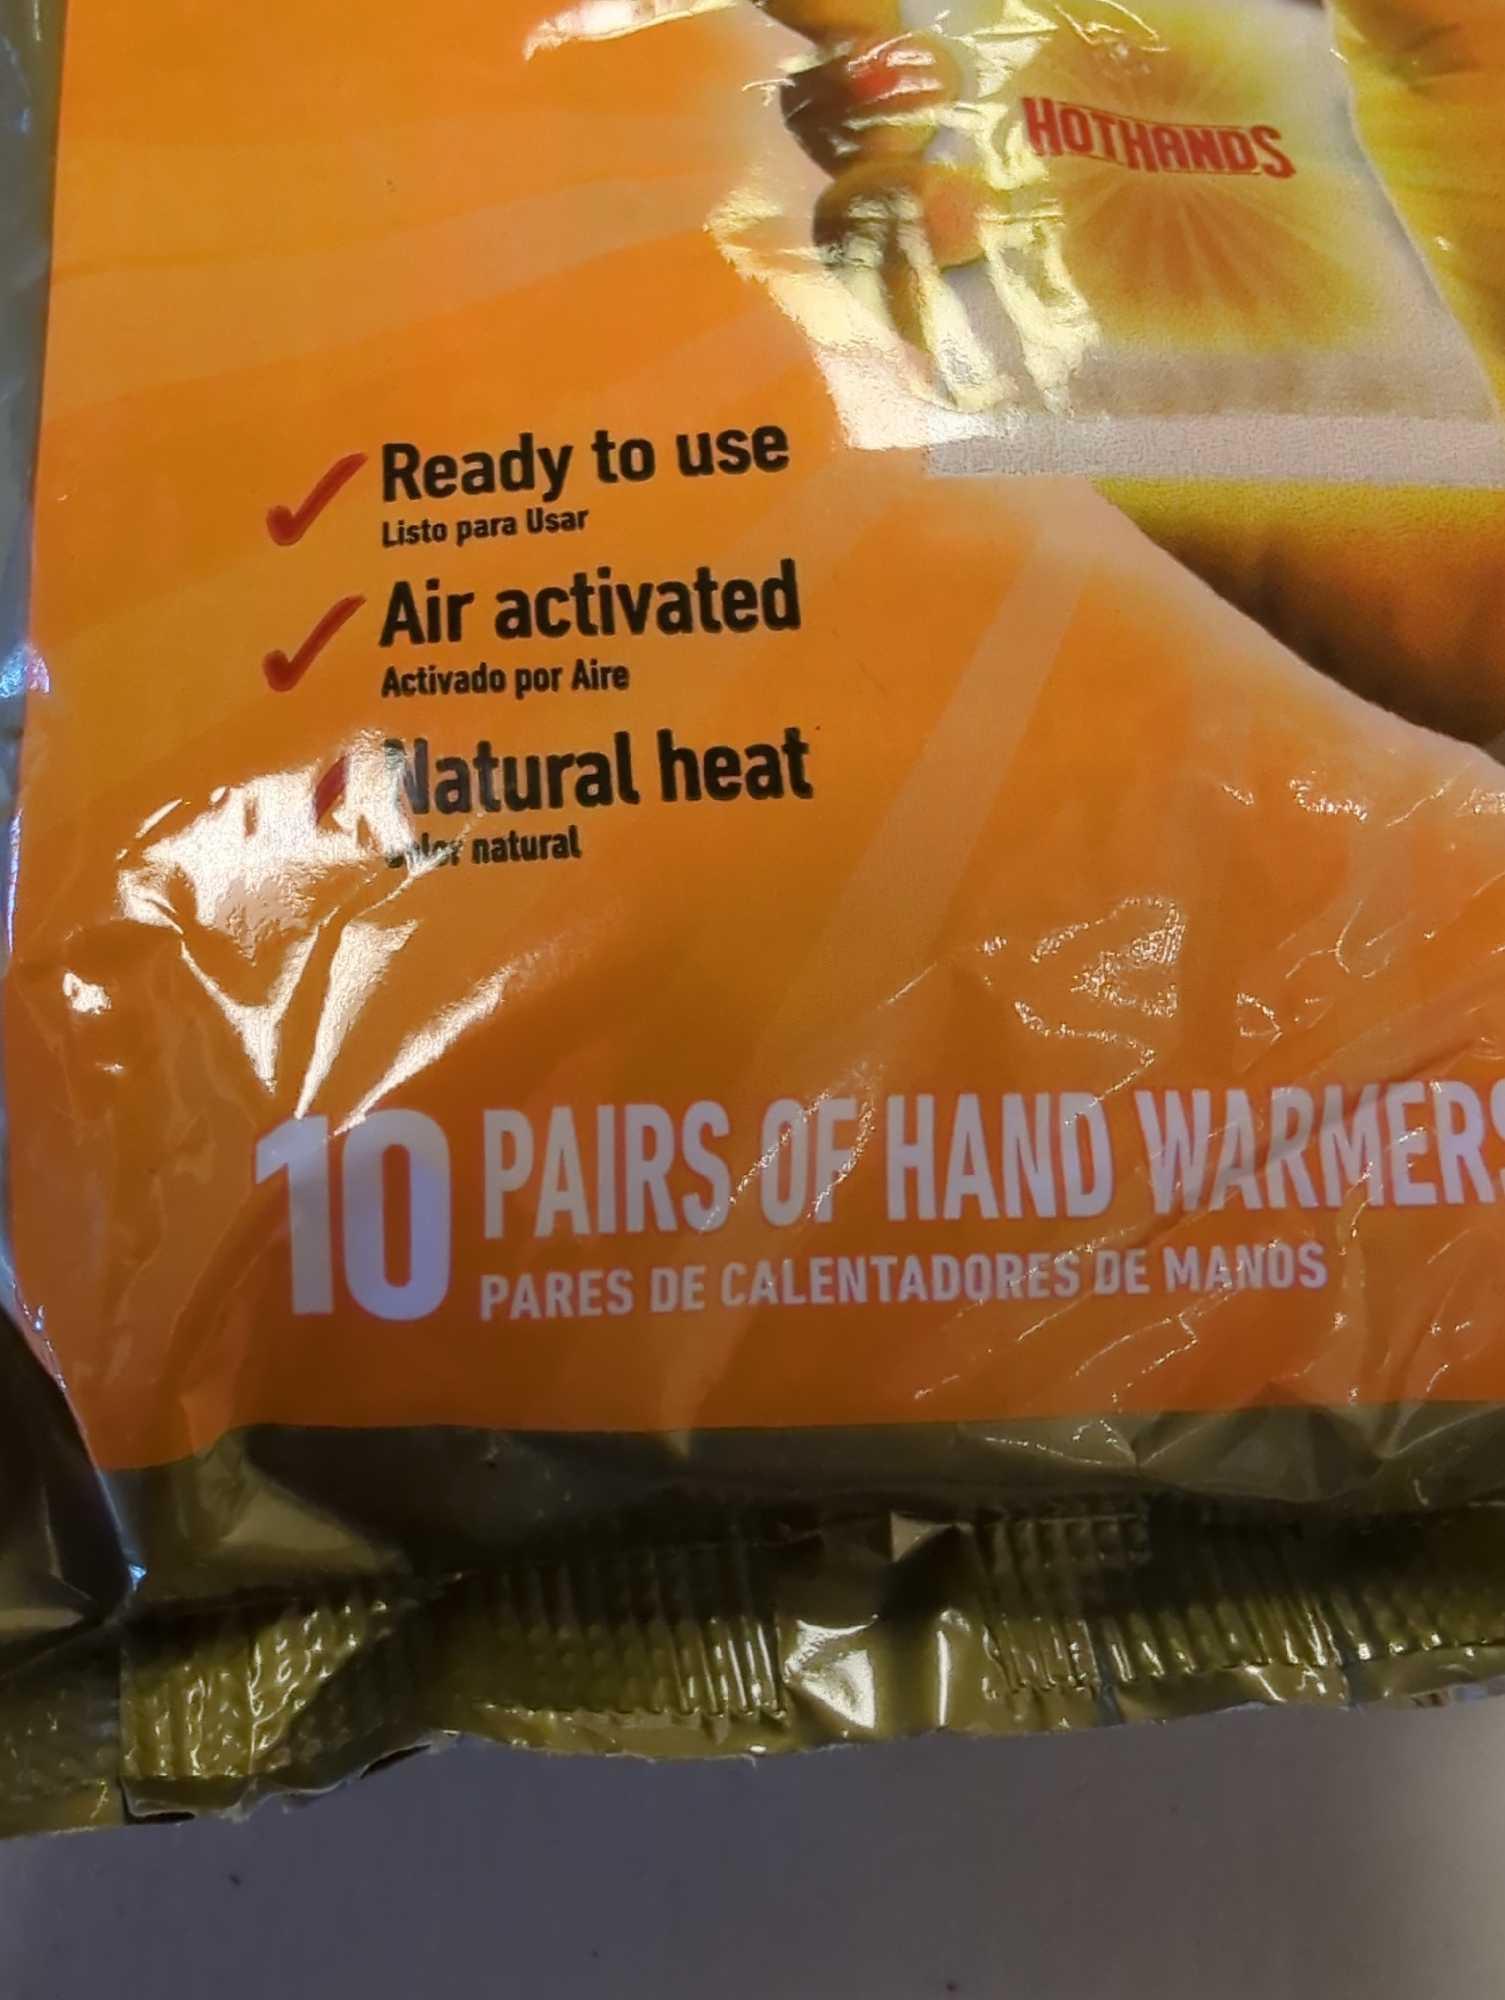 Lot of 2 HotHands Hand Warmer 10-Pair Value Pack and 6-Pair. Comes as is shown in photos. Appears to